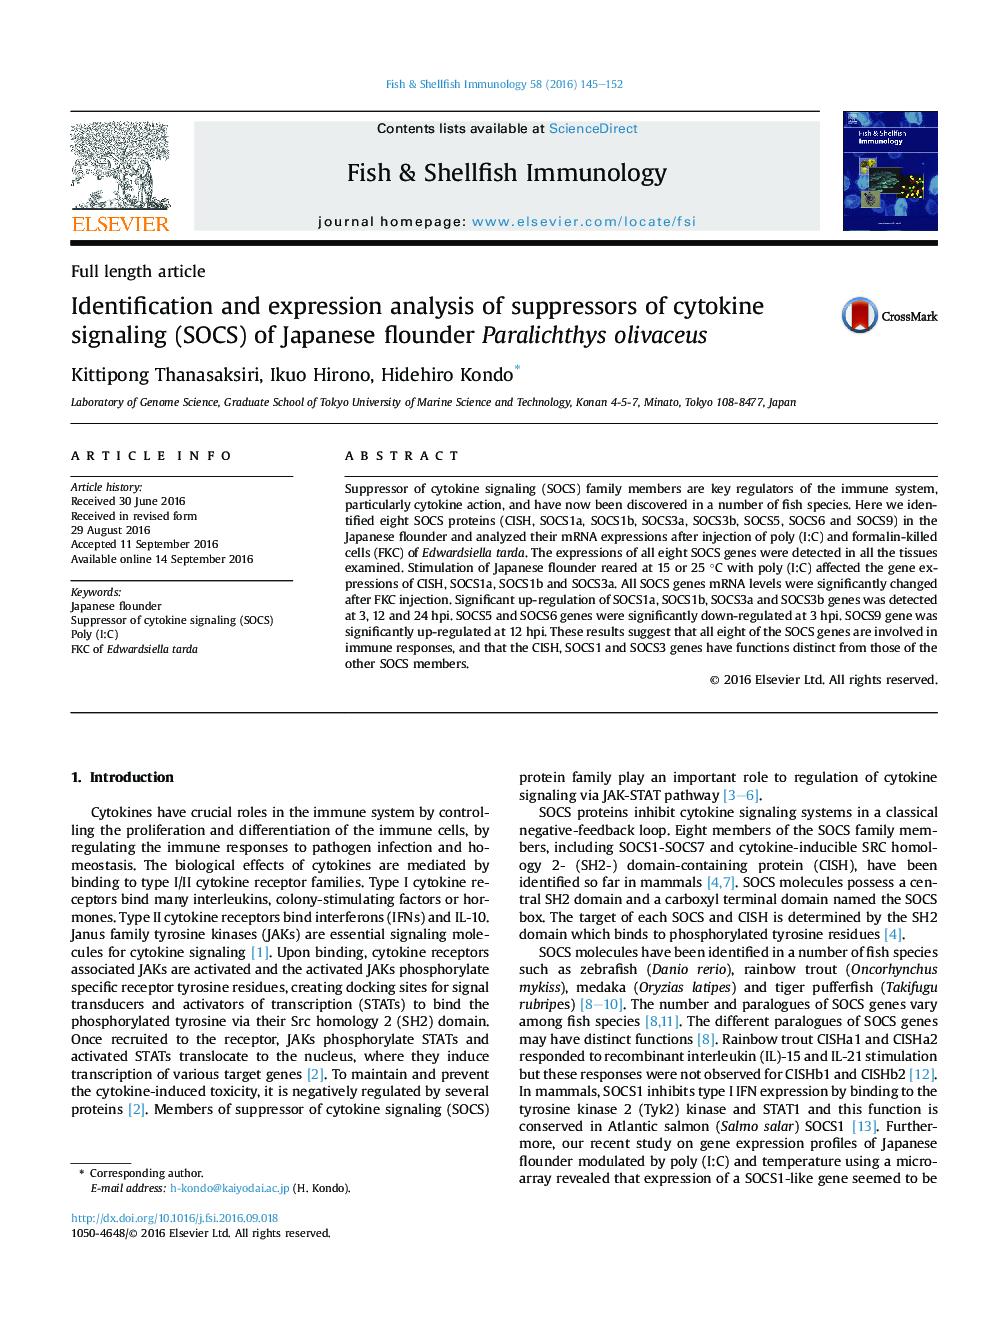 Identification and expression analysis of suppressors of cytokine signaling (SOCS) of Japanese flounder Paralichthys olivaceus